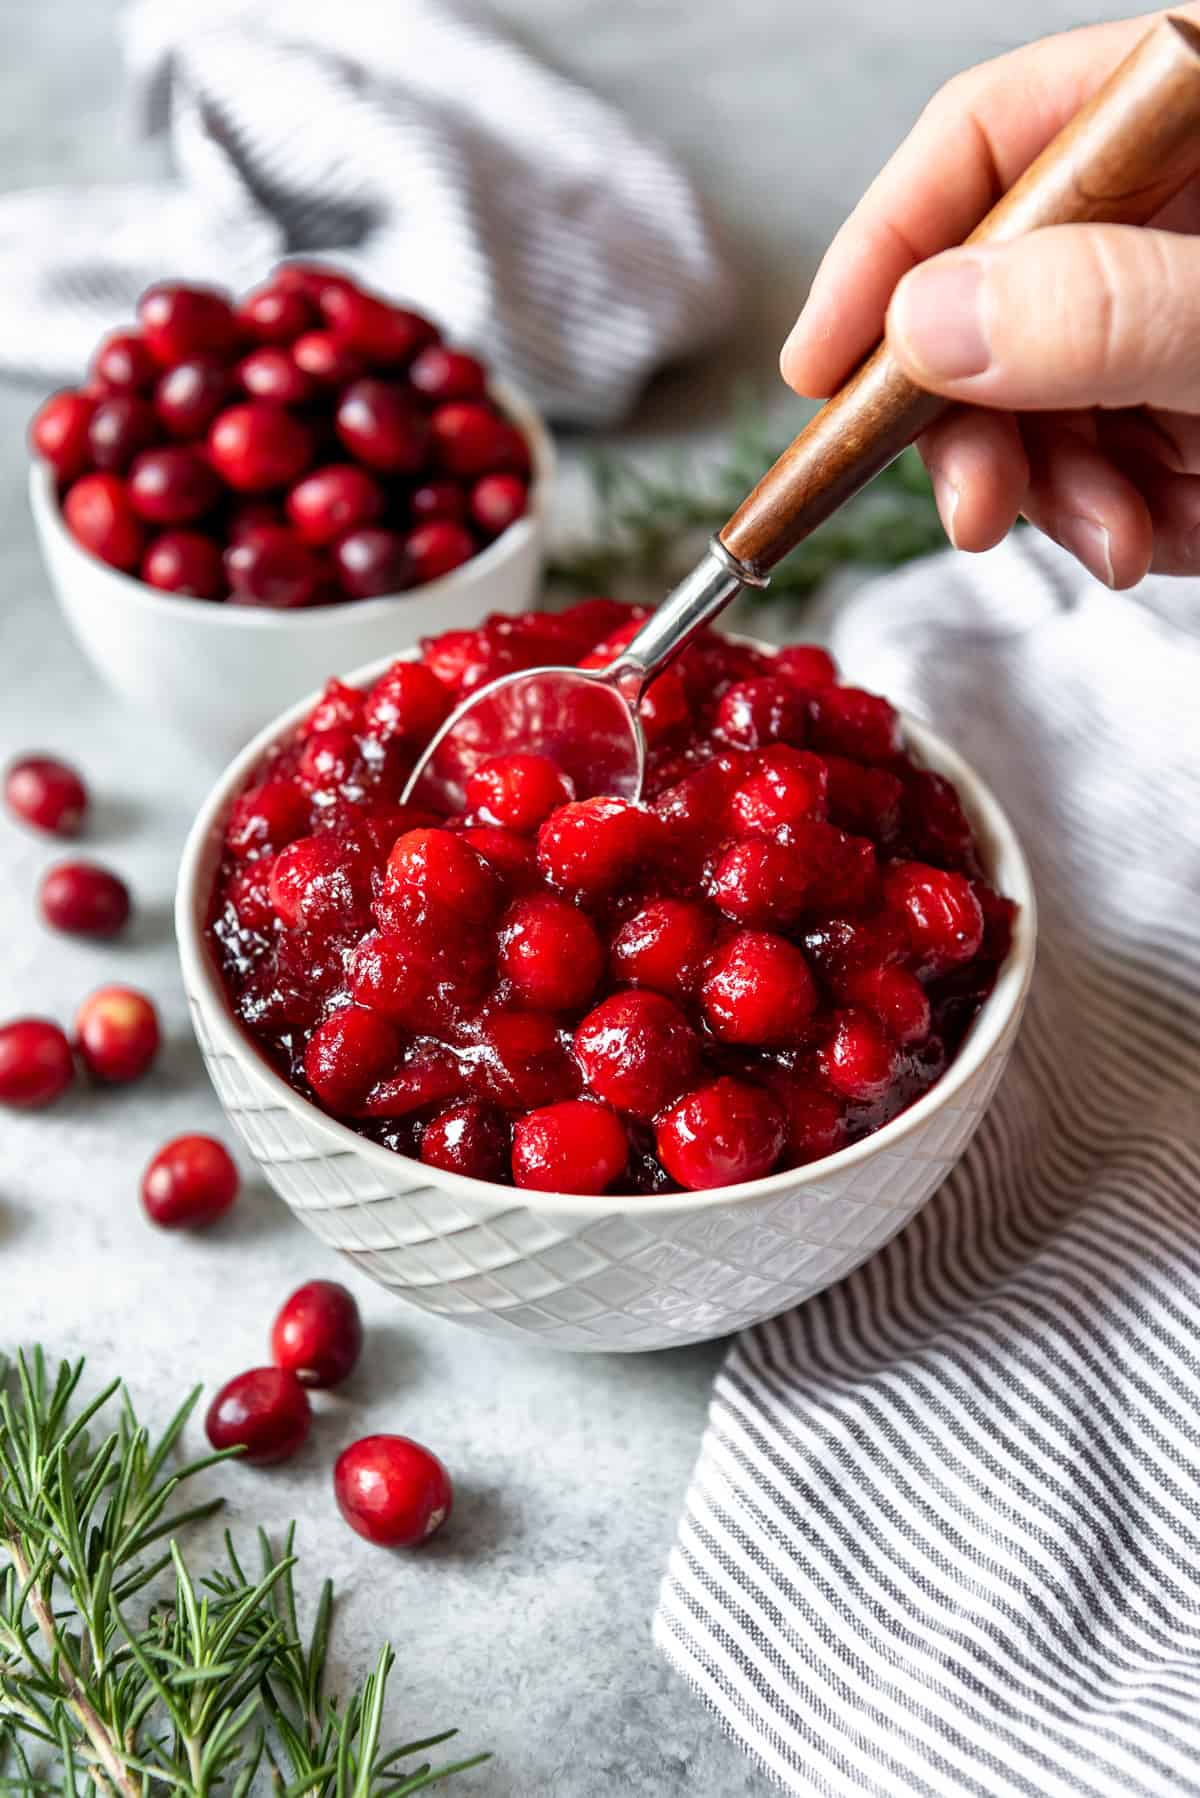 A hand holding a spoon in a bowl of homemade whole cranberry sauce.